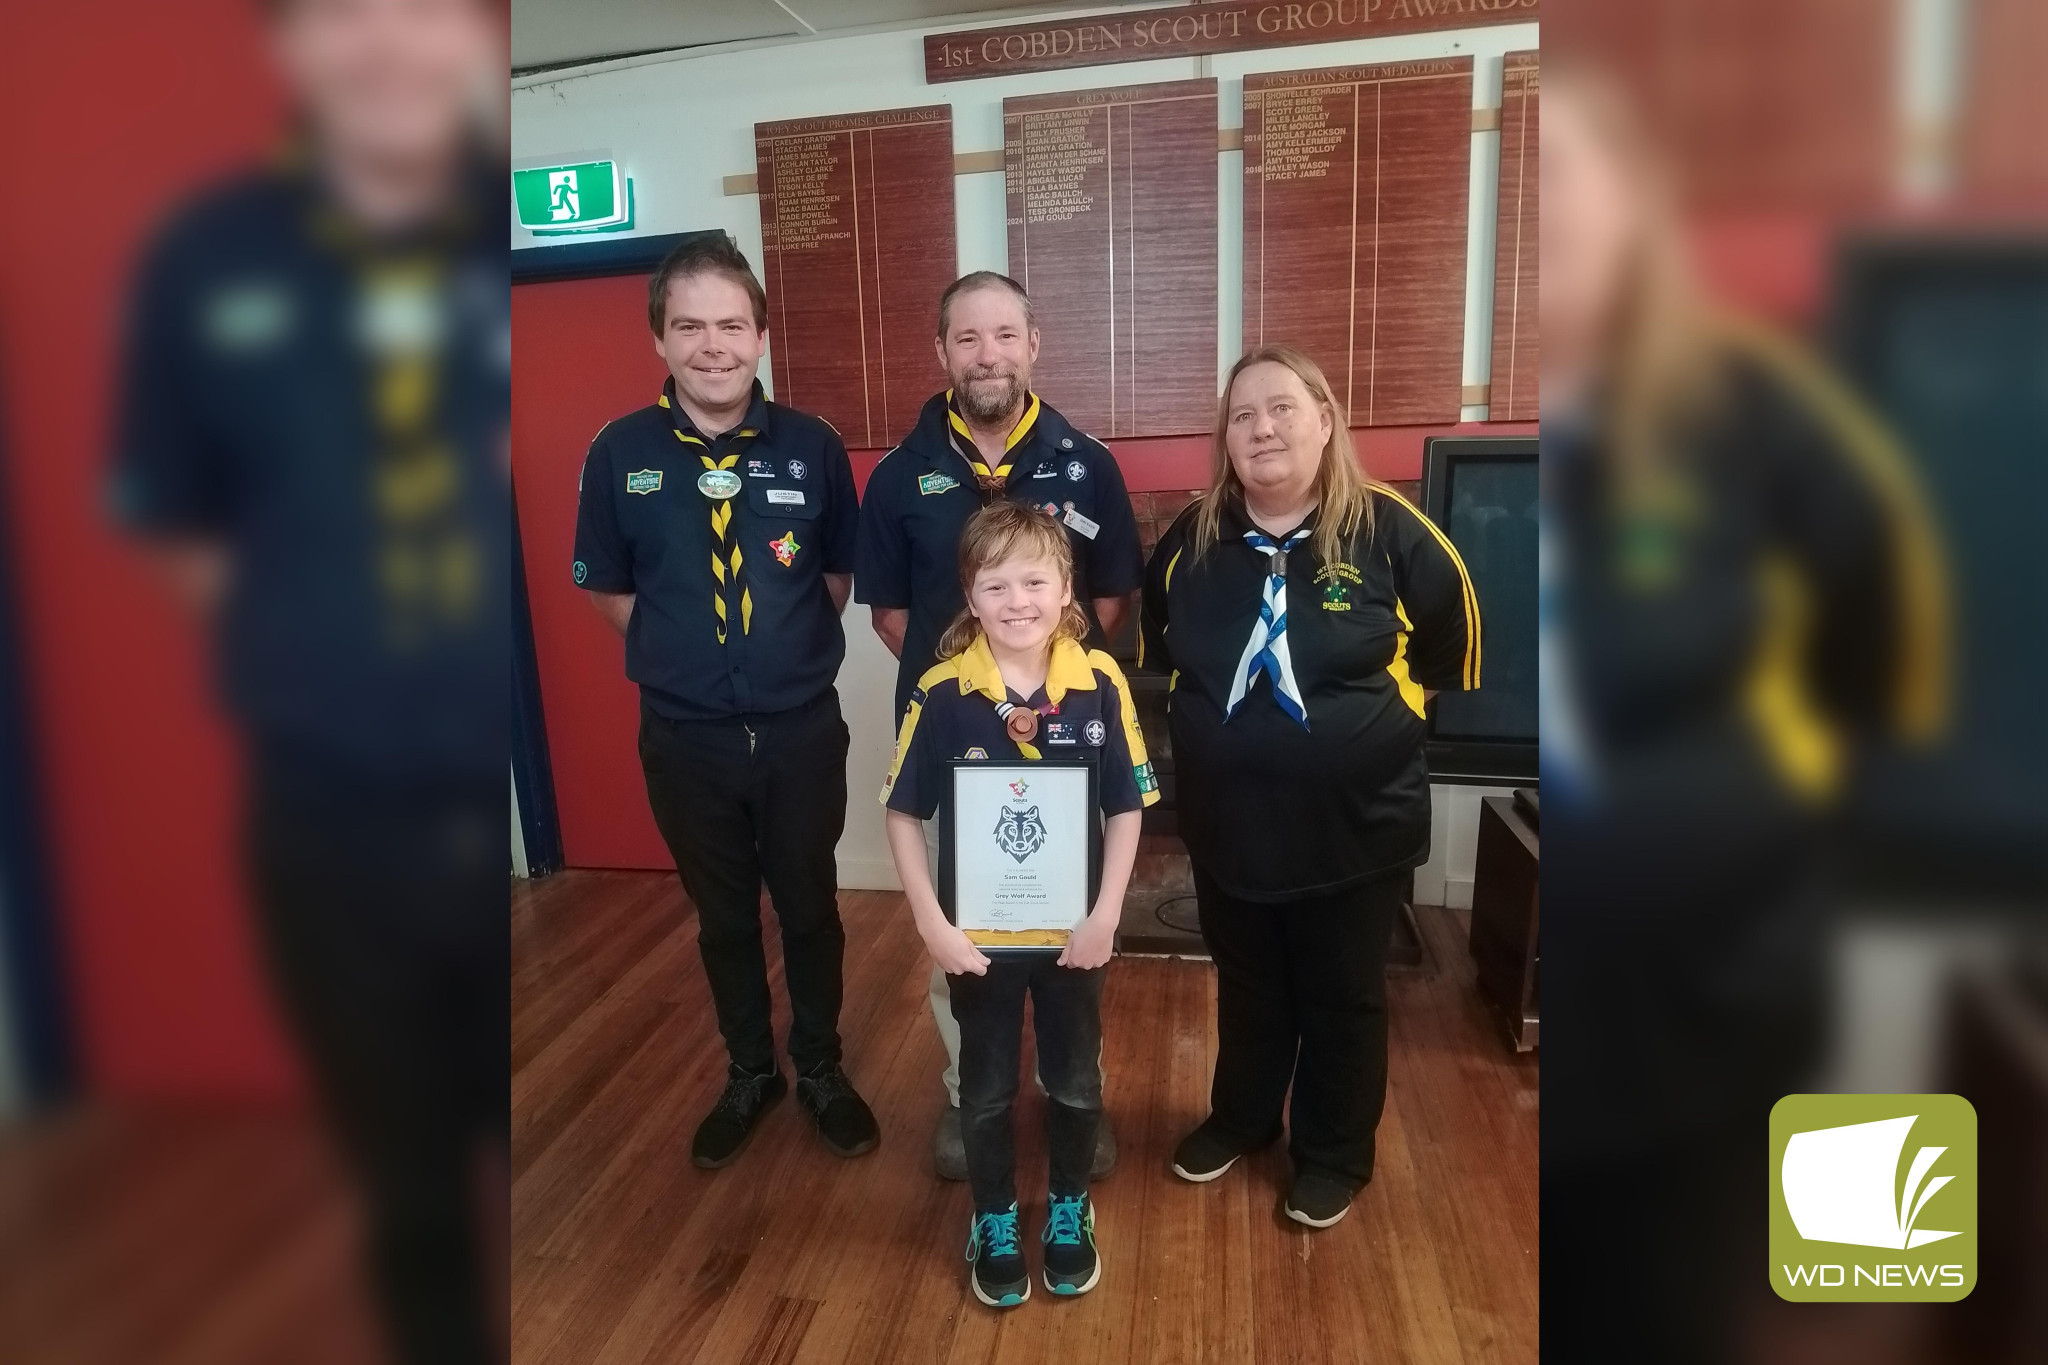 Congratulations: Cobden Cub Sam Gould, pictured with 1st Cobden Scout representatives Justin Keane, John Wason and Mandy Reid, was presented with the Grey Wolf Award recently.